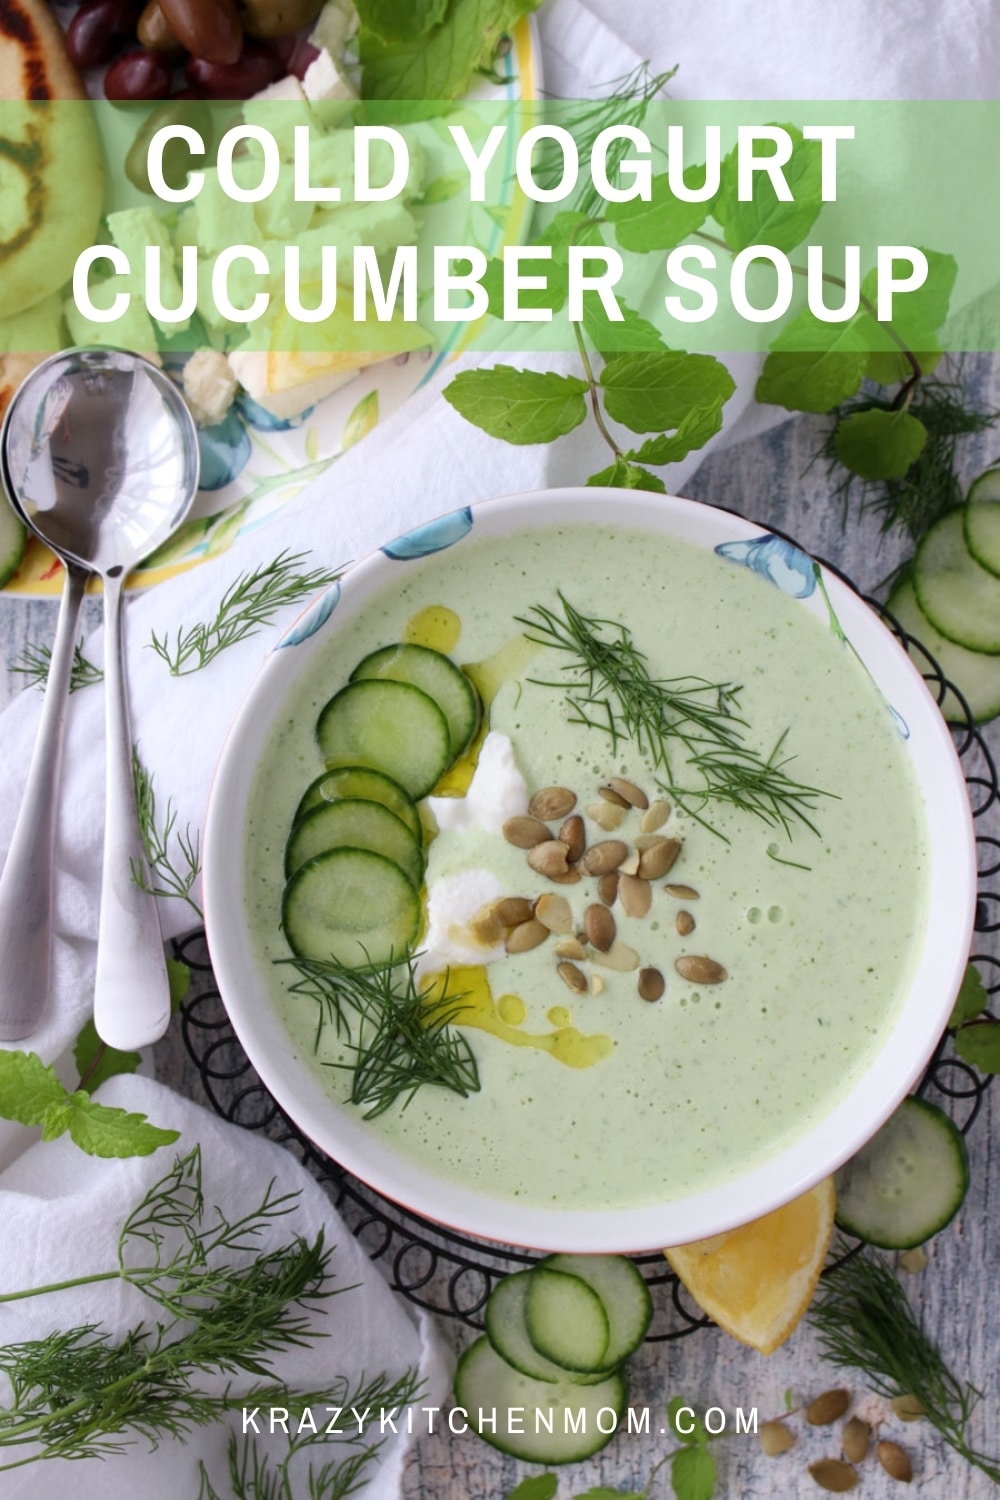 Who says you can't have soup in the summertime? This is soup is cold, fresh, and refreshing. It's ridiculously easy to make and ready in minutes.  via @krazykitchenmom